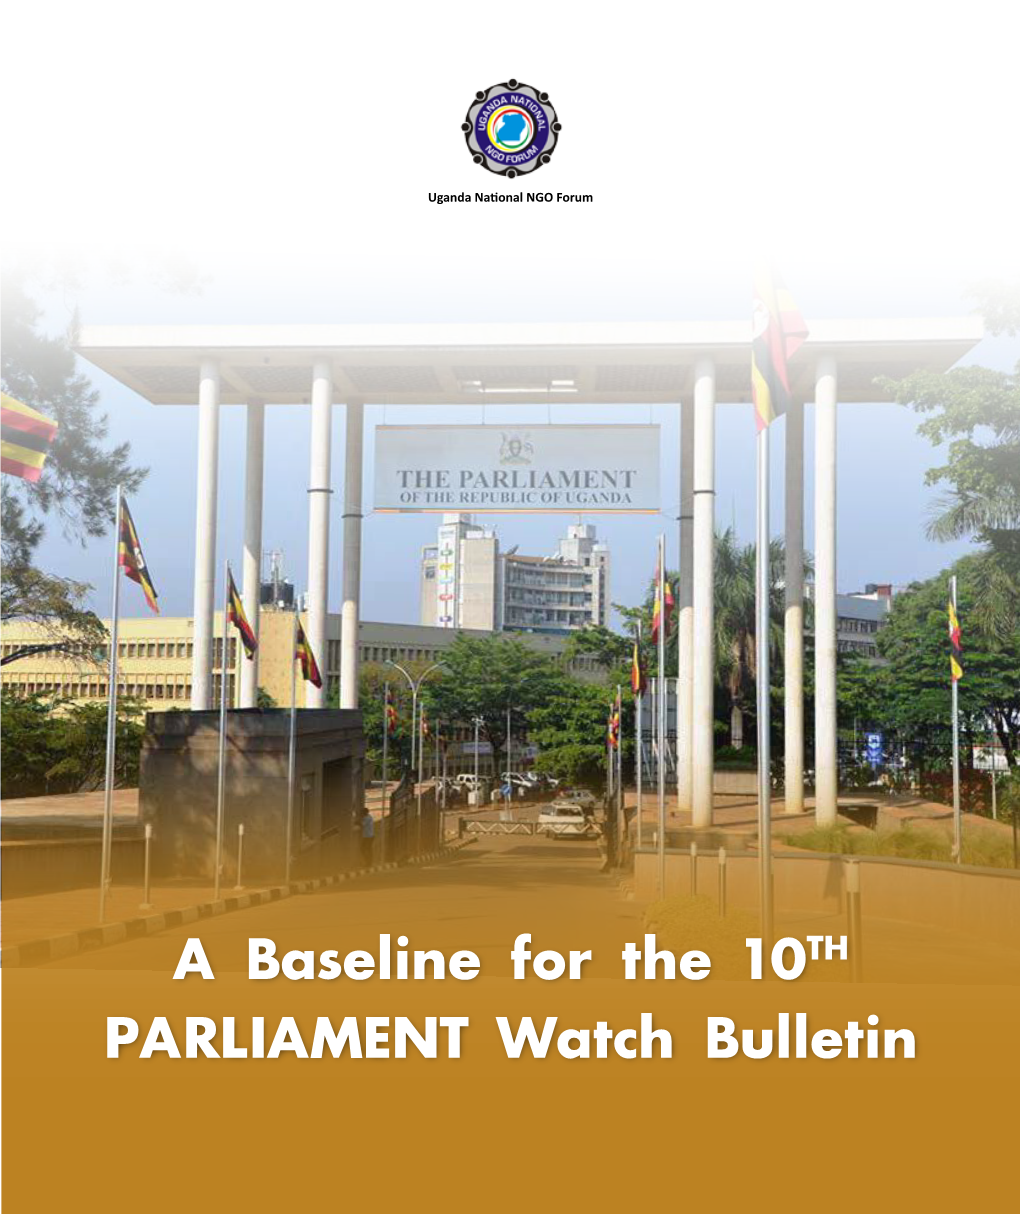 A Baseline for the 10TH PARLIAMENT Watch Bulletin